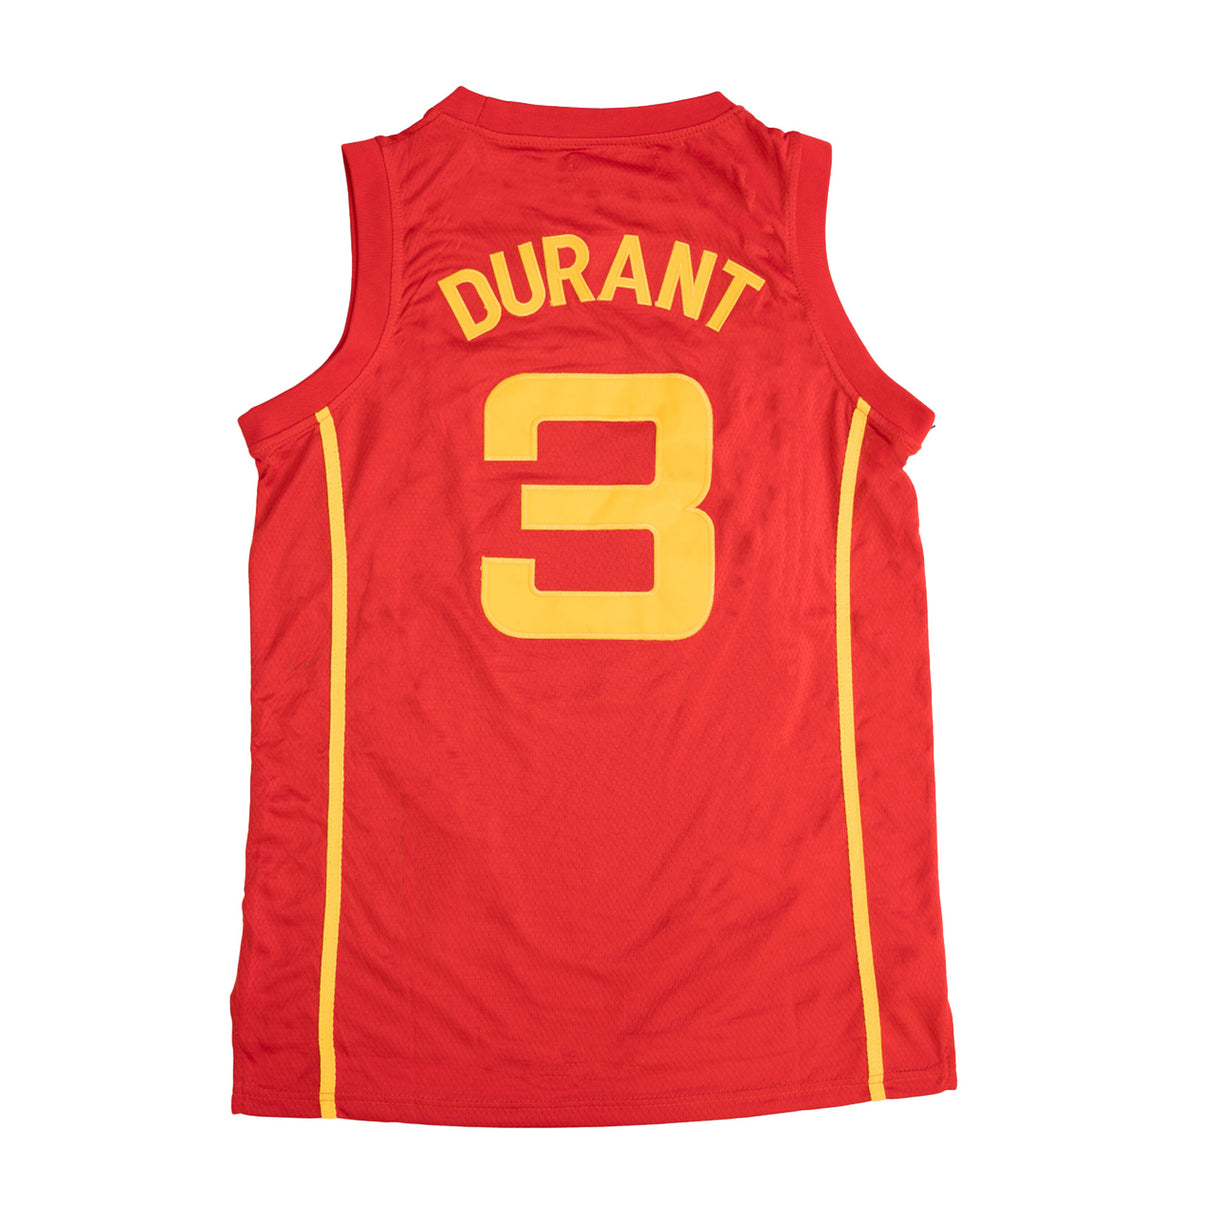 KEVIN DURANT MCD ALL AMERICAN HIGH SCHOOL JERSEY (RED)